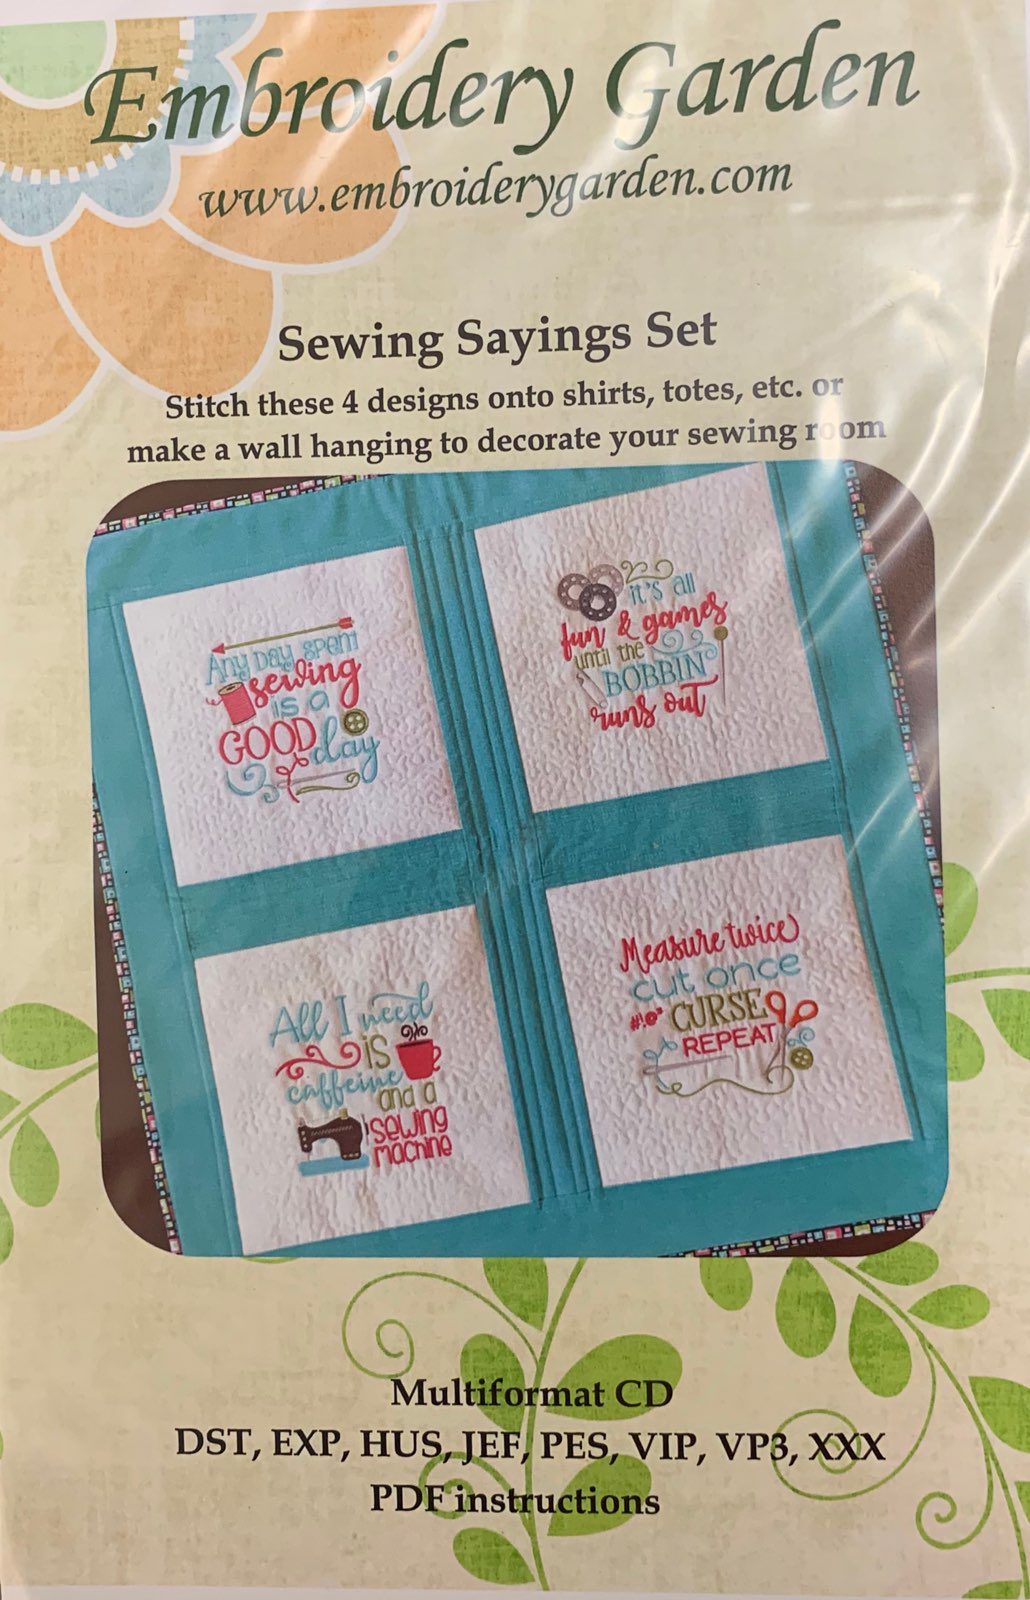 Embroidery Garden - Sewing Sayings Set ME CD